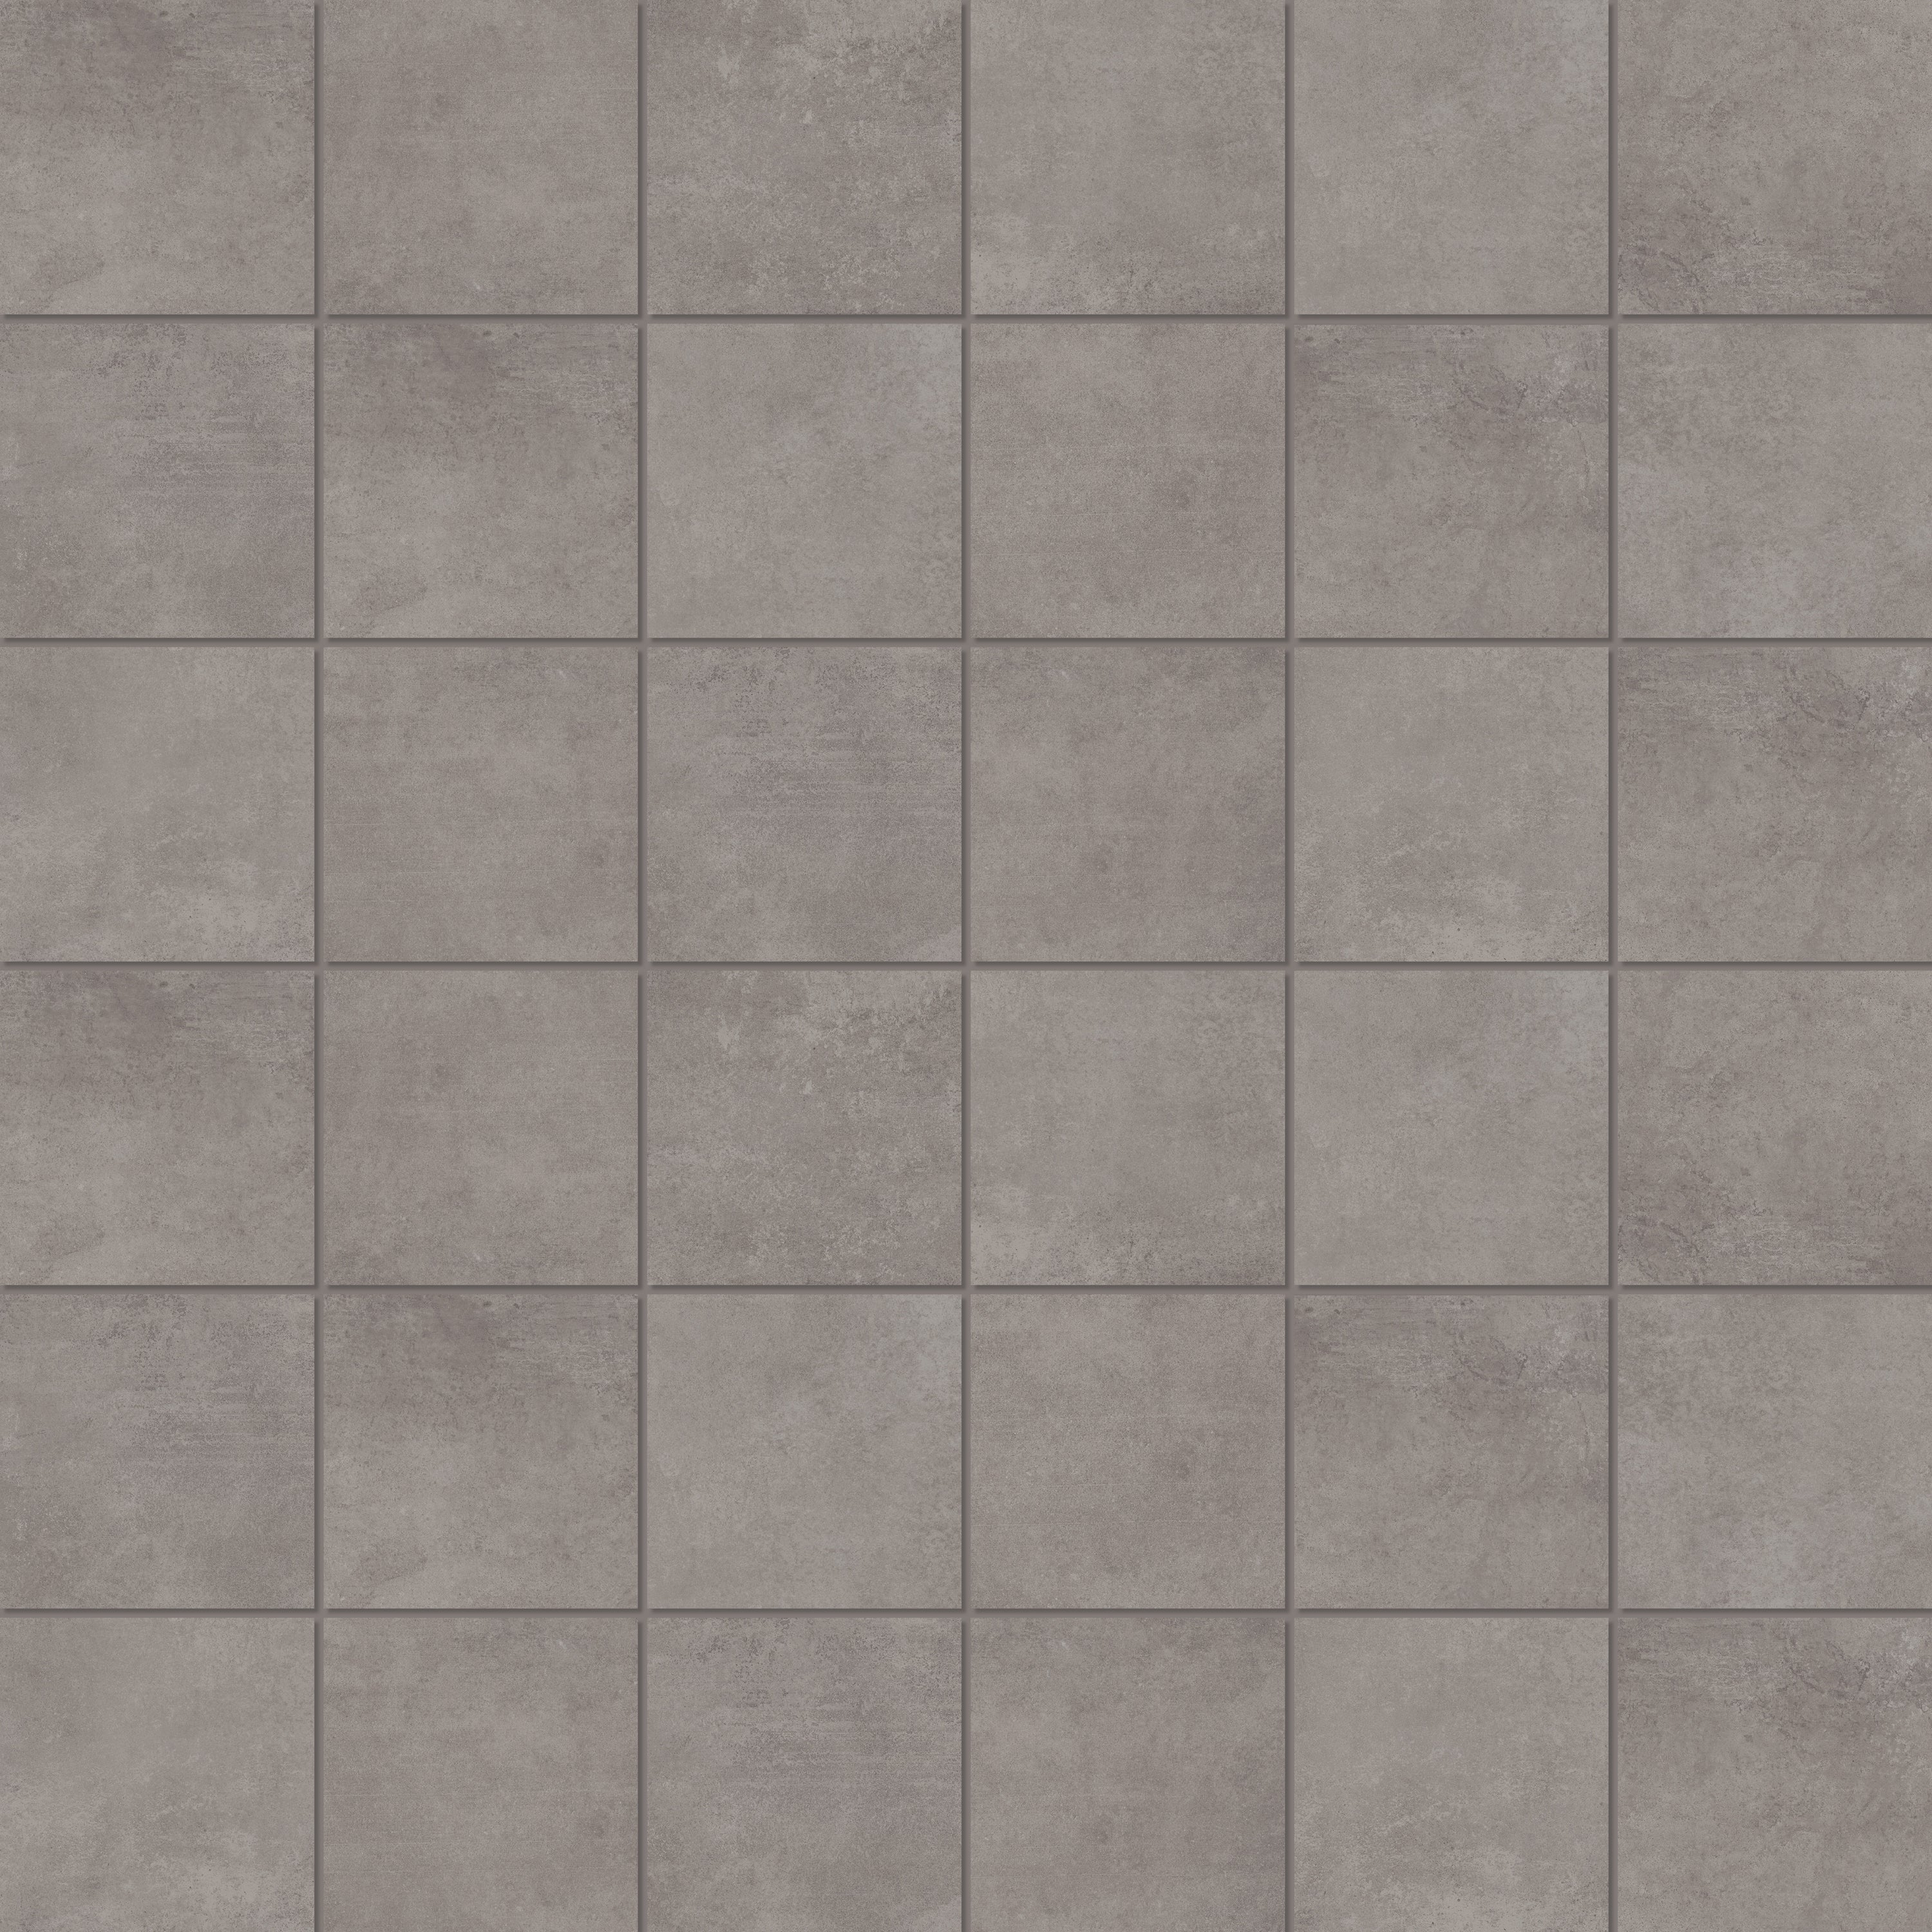 landmark contract portland ash straight stack 2x2 mosaic 12x12x8mm matte pressed porcelain tile distributed by surface group international